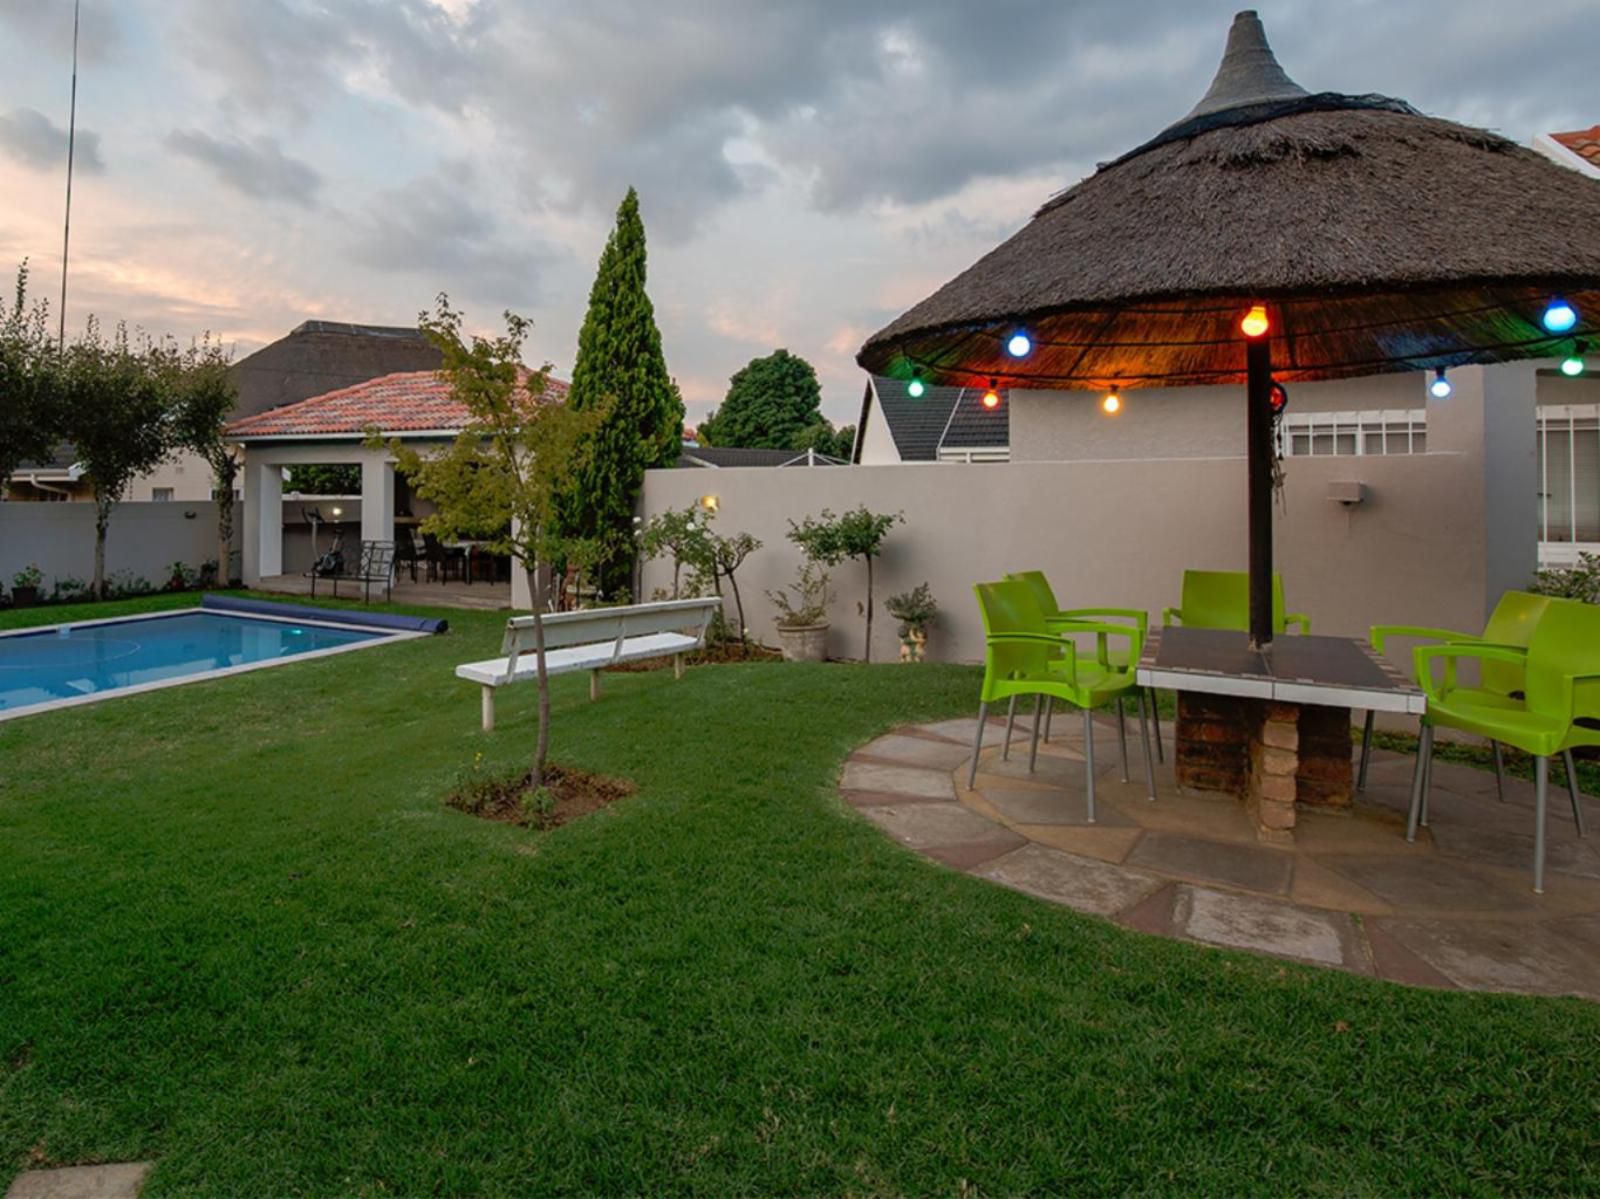 Angelica Guesthouse Boksburg Johannesburg Gauteng South Africa House, Building, Architecture, Swimming Pool